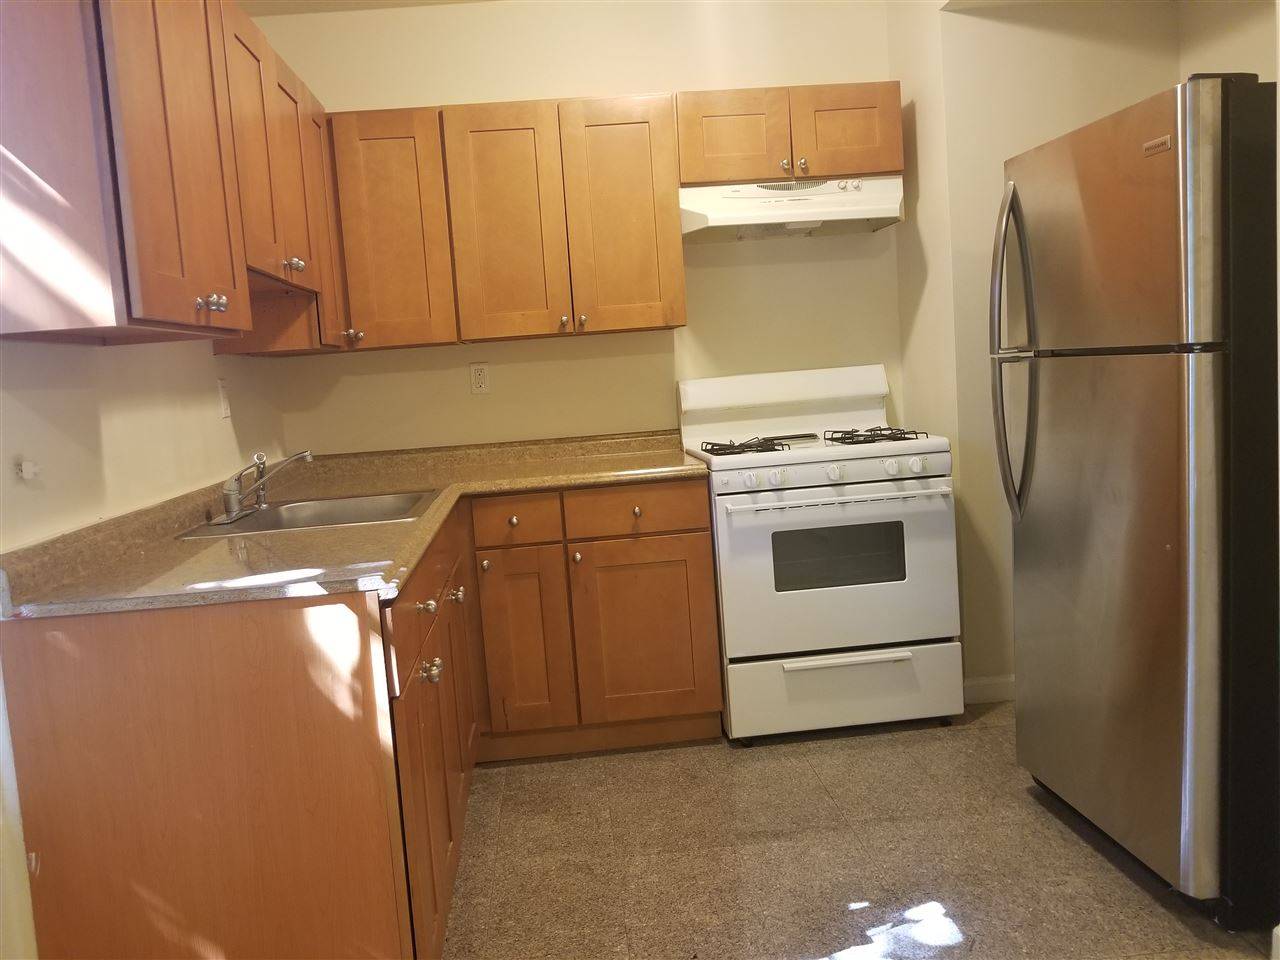 Come check out a renovated 2 bedroom apartment in Jersey City